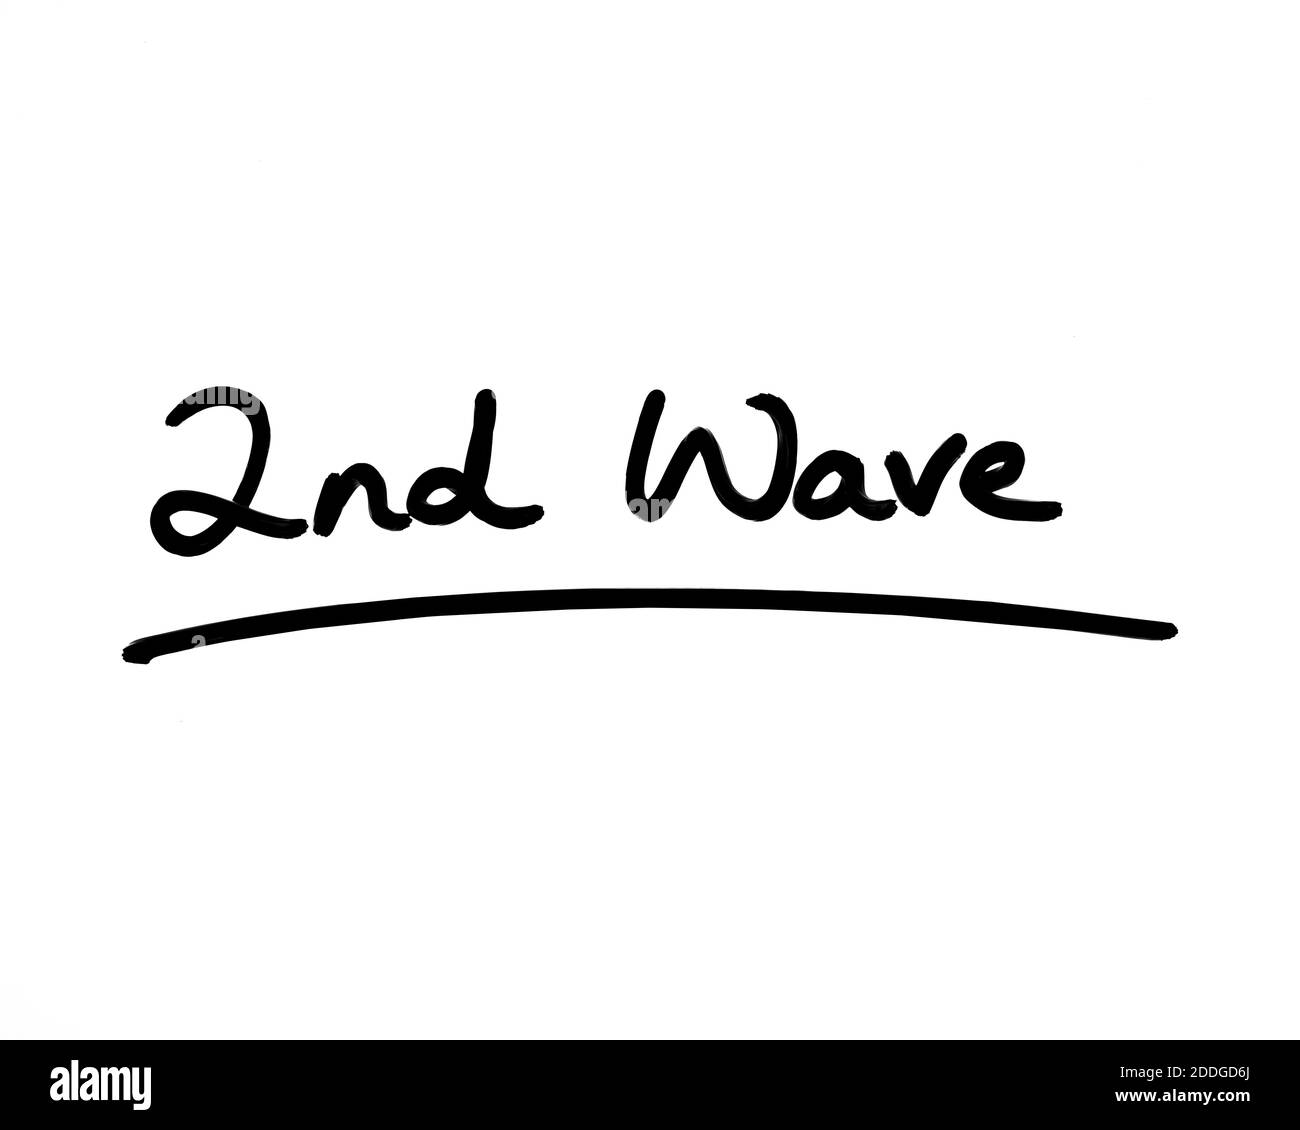 2nd Wave handwritten on a white background. Stock Photo